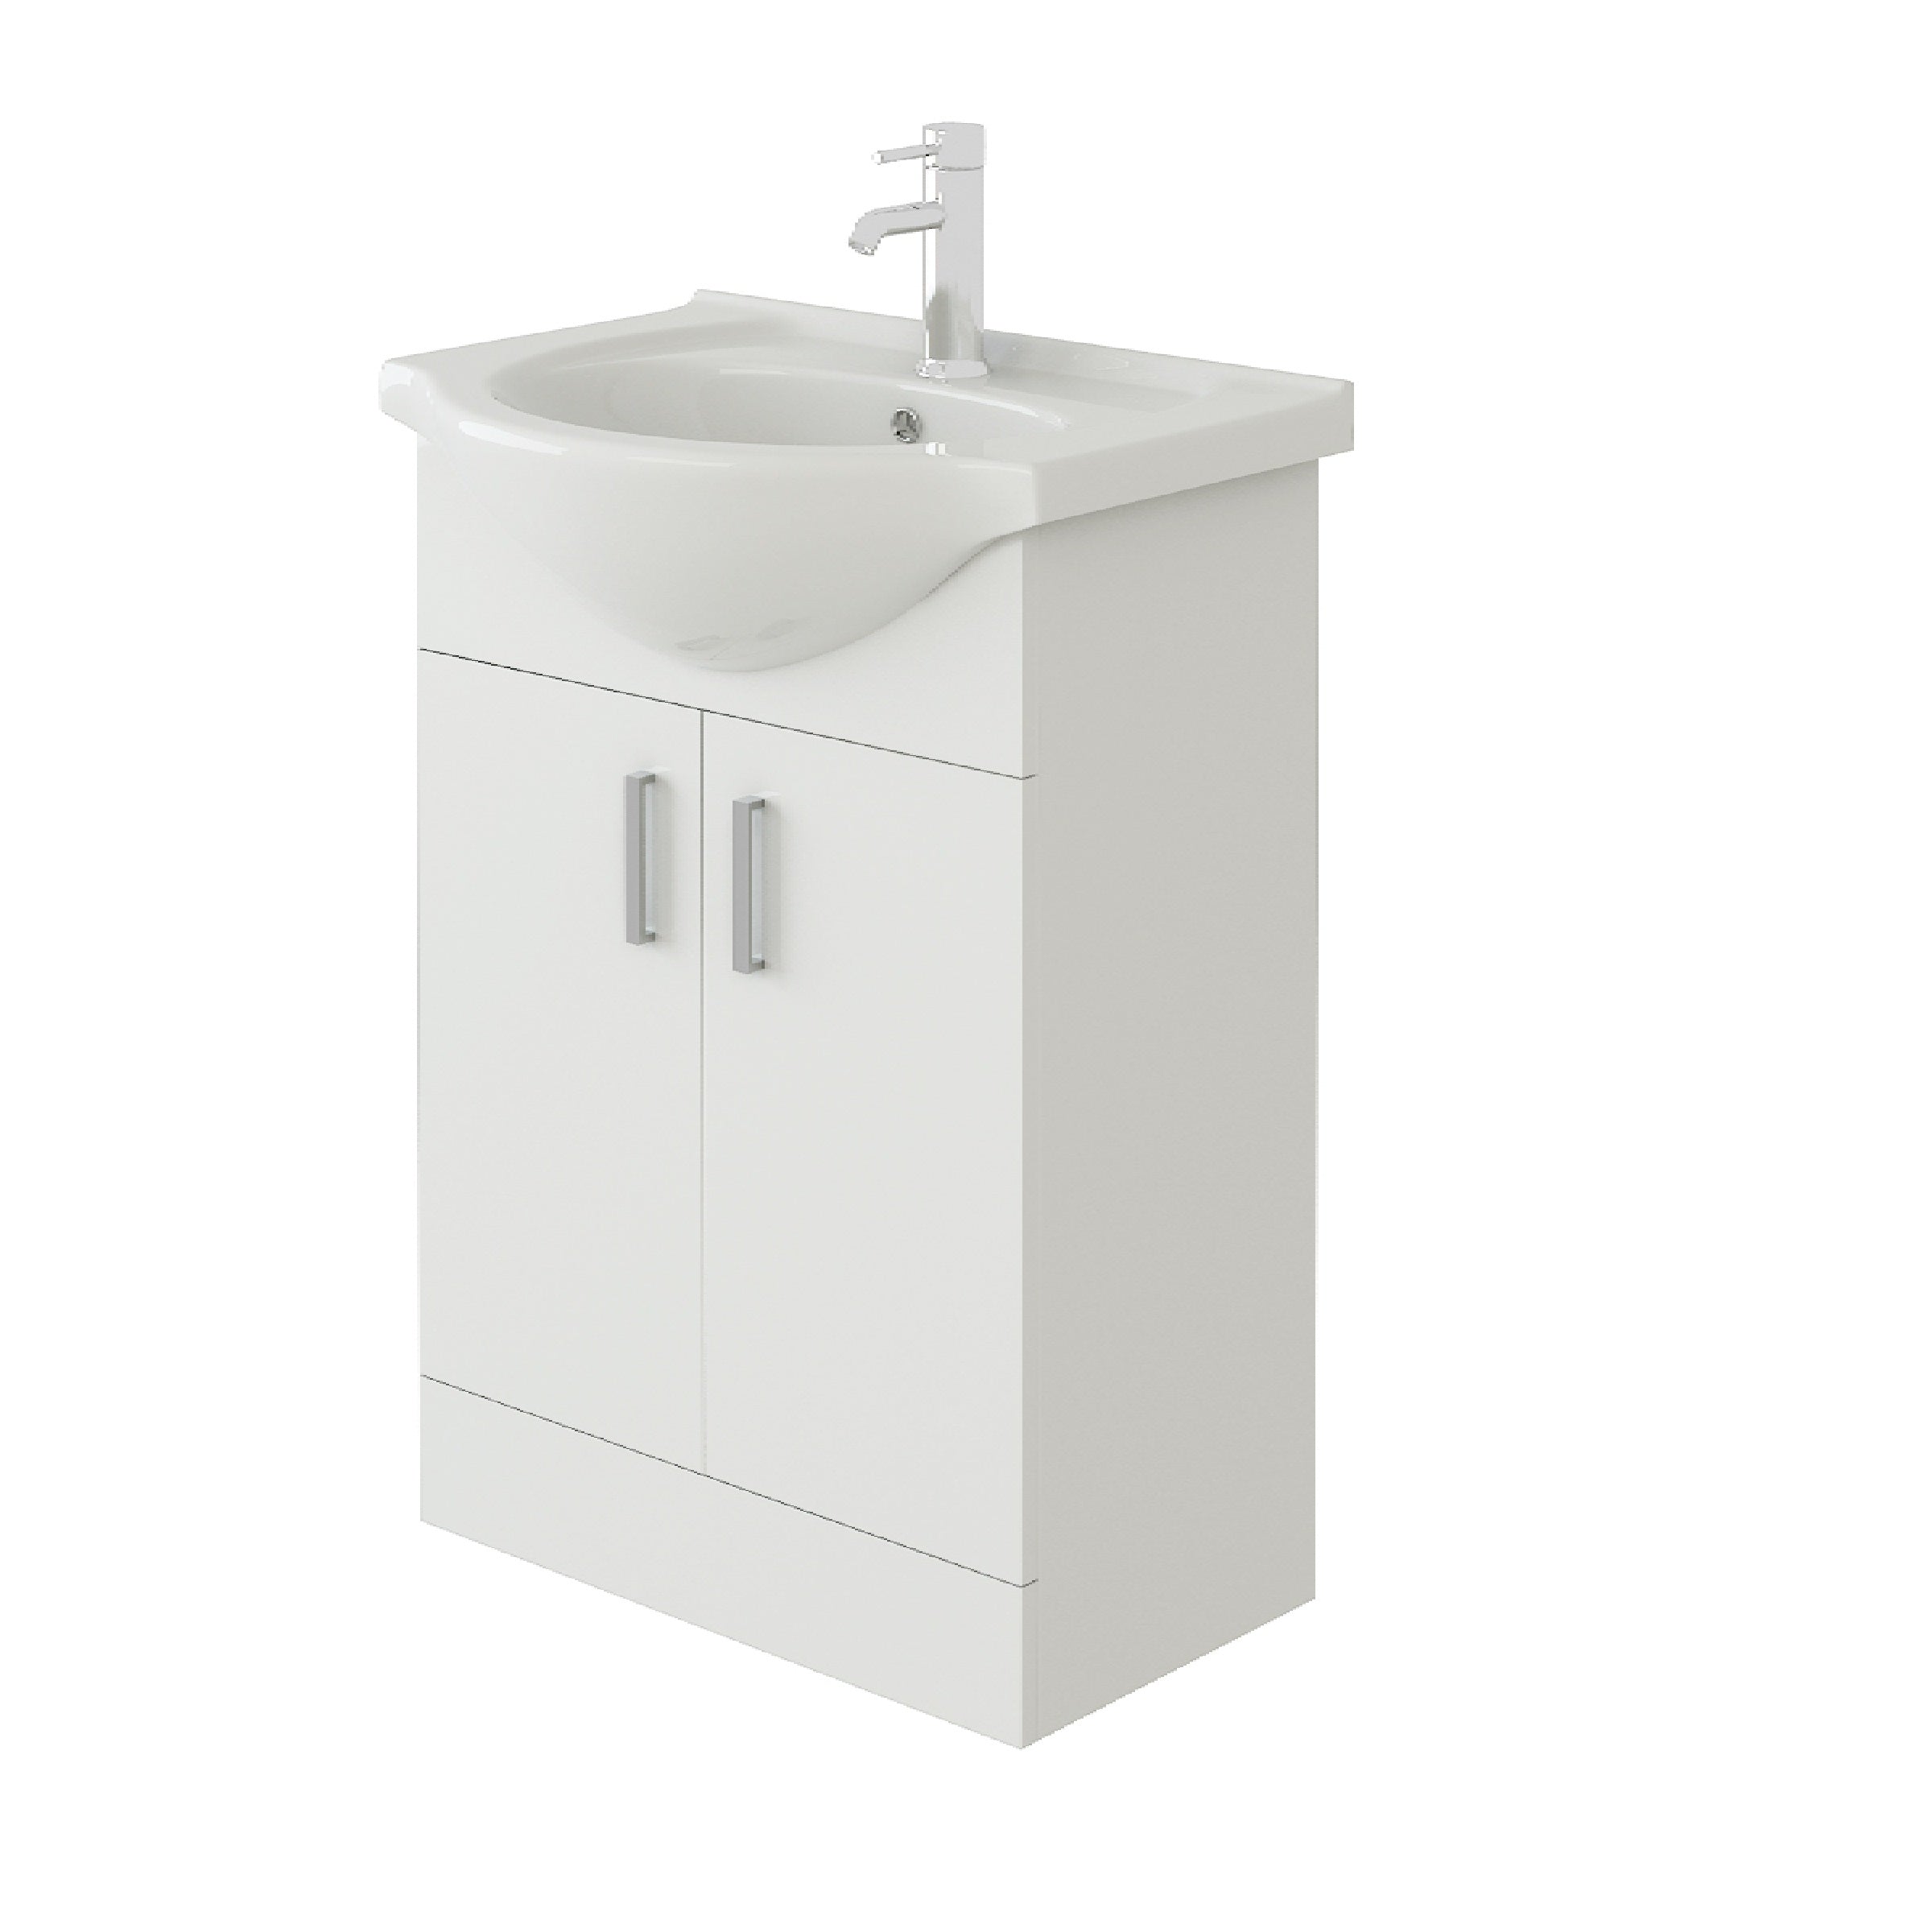 Linx Floorstanding Vanity Unit With Basin - 1 Tap Hole - Gloss White